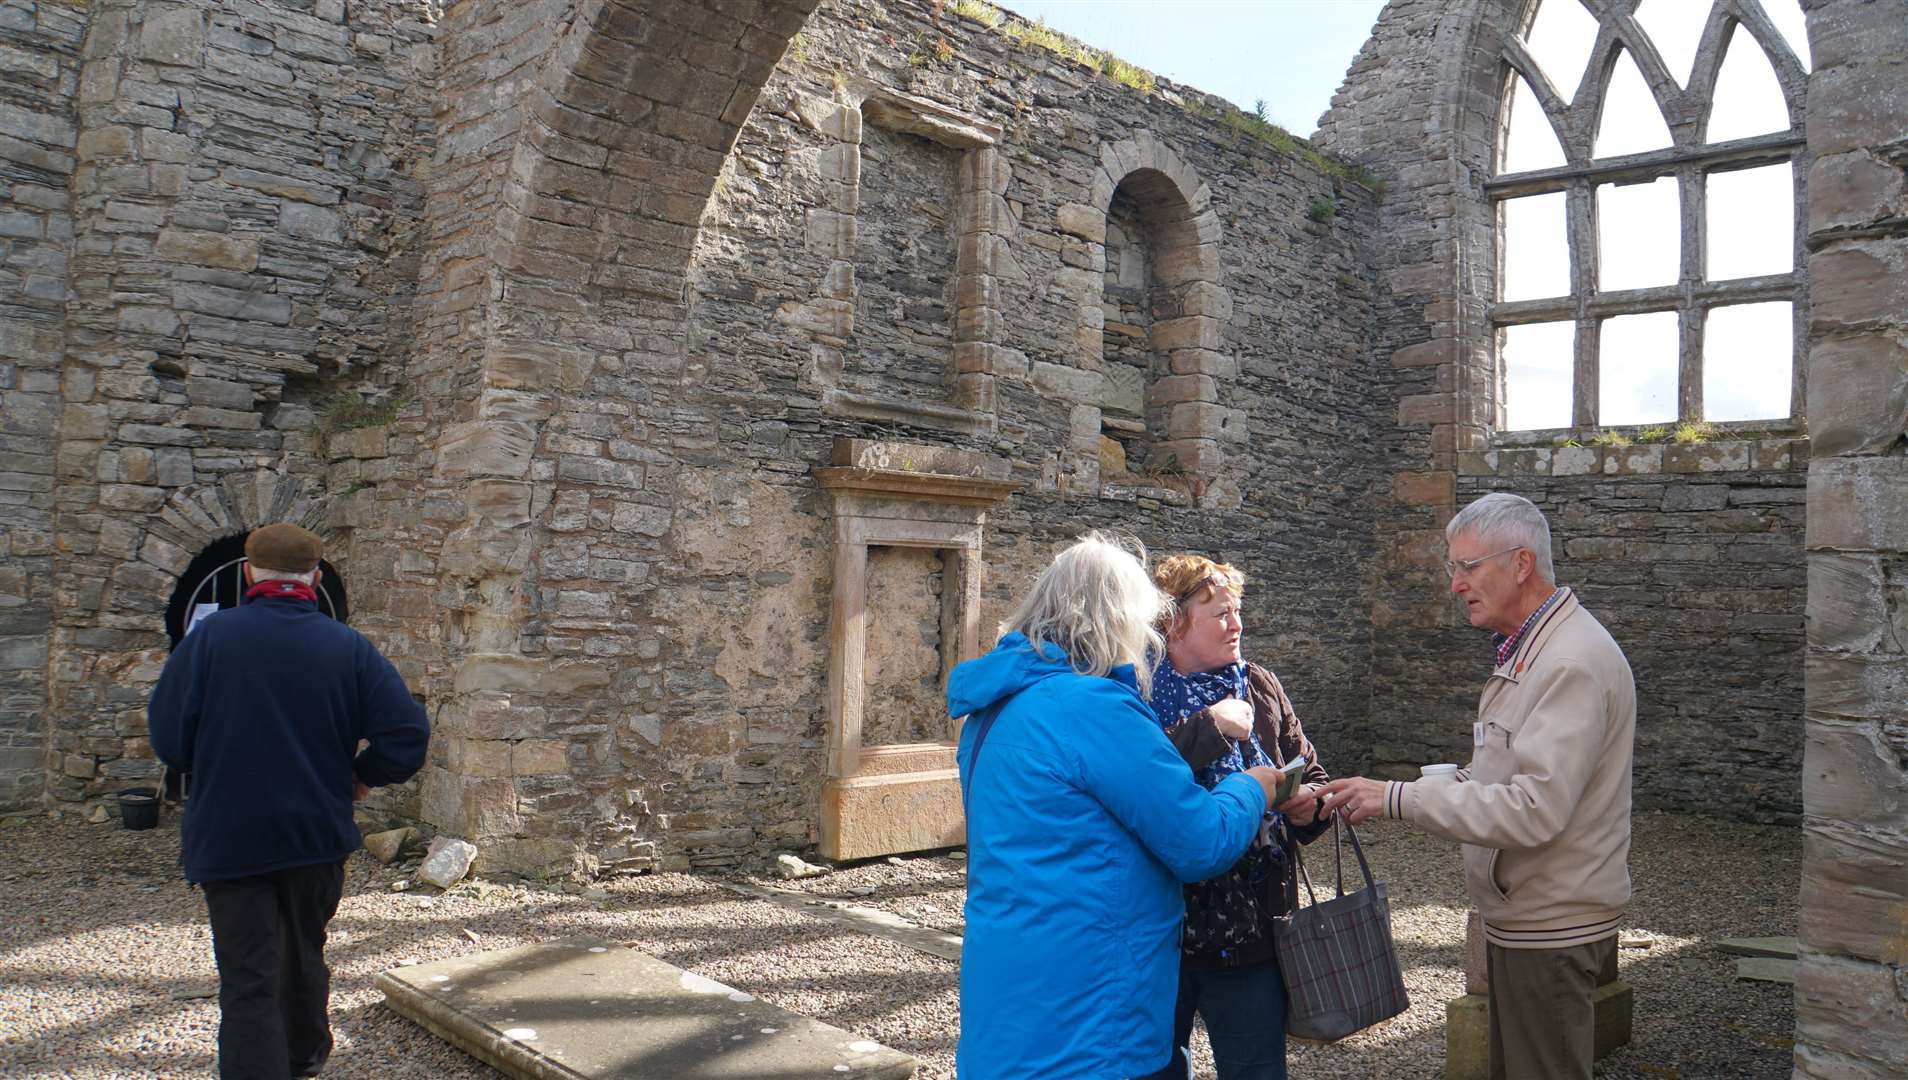 Visitors at Old St Peter’s Kirk in Thurso as part of the Doors Open Days programme in 2018.